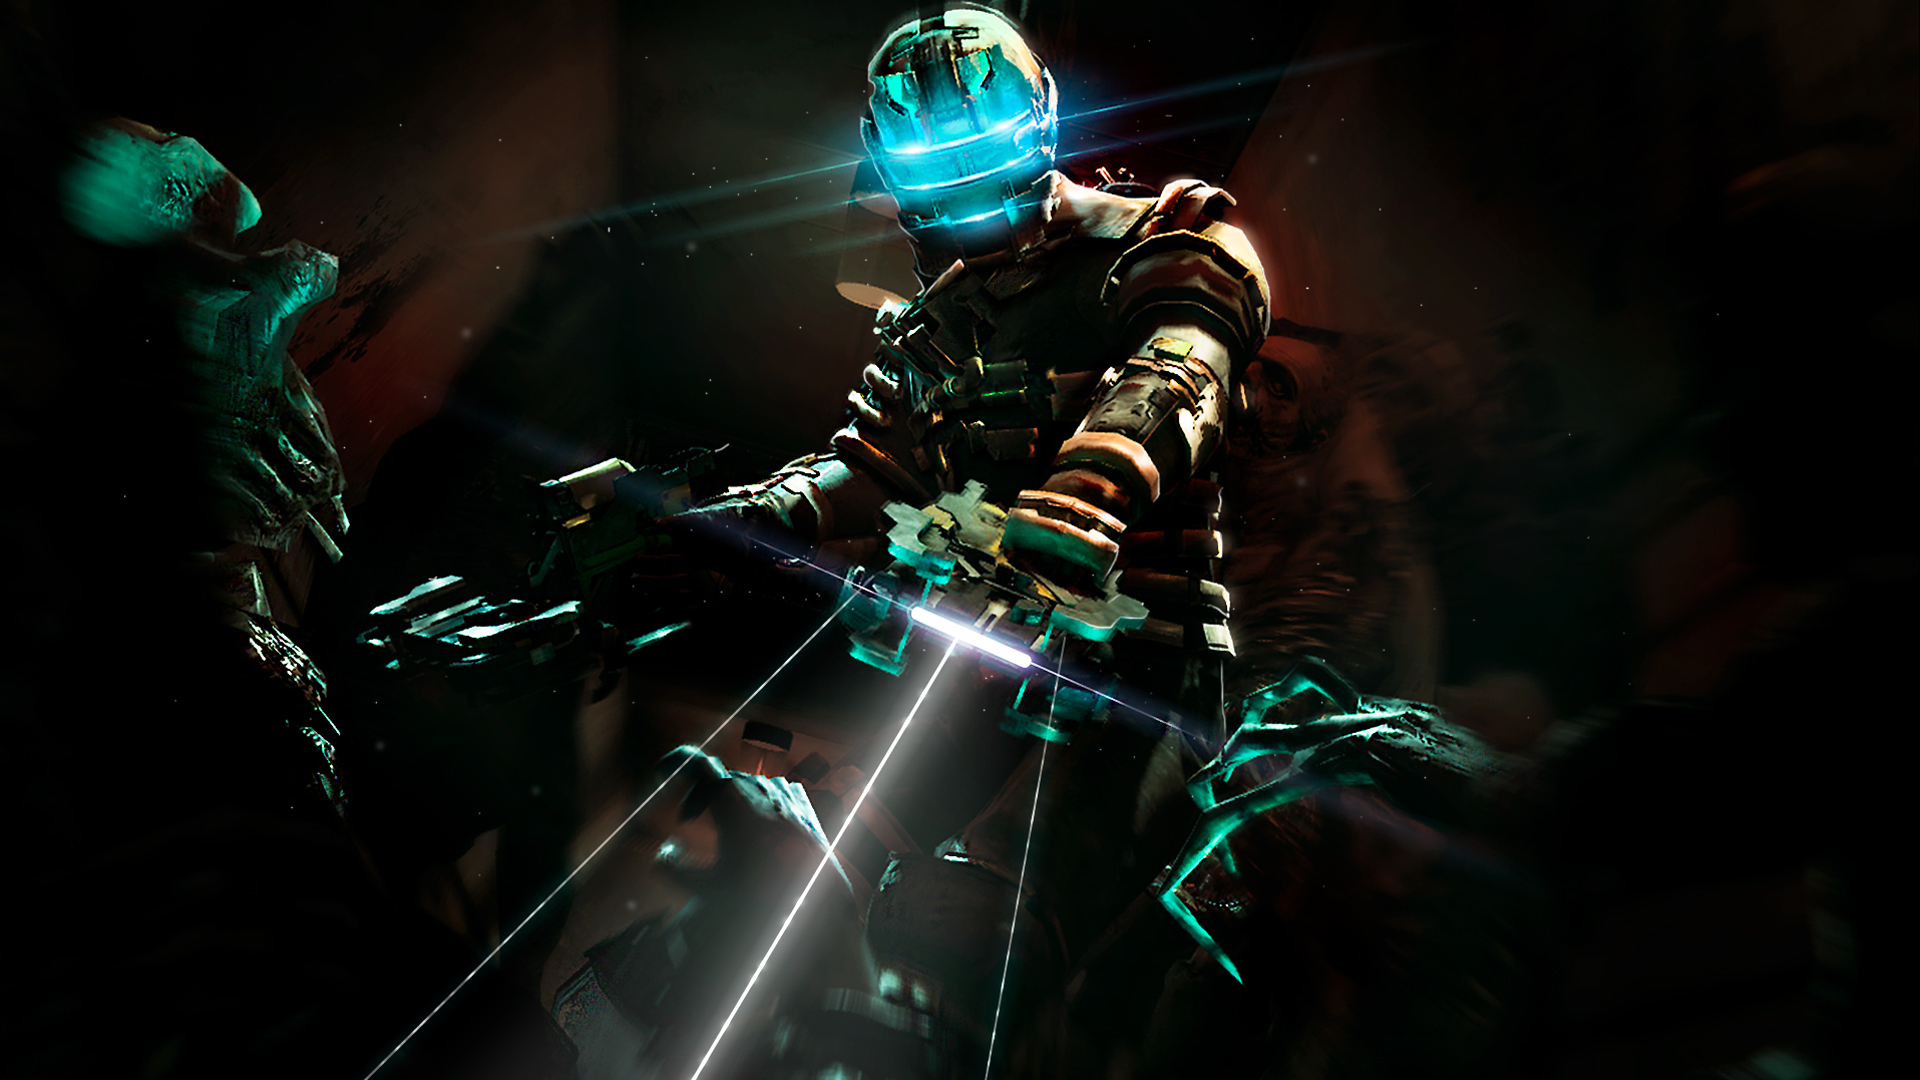 dead space 3, dead space, video game, isaac clarke